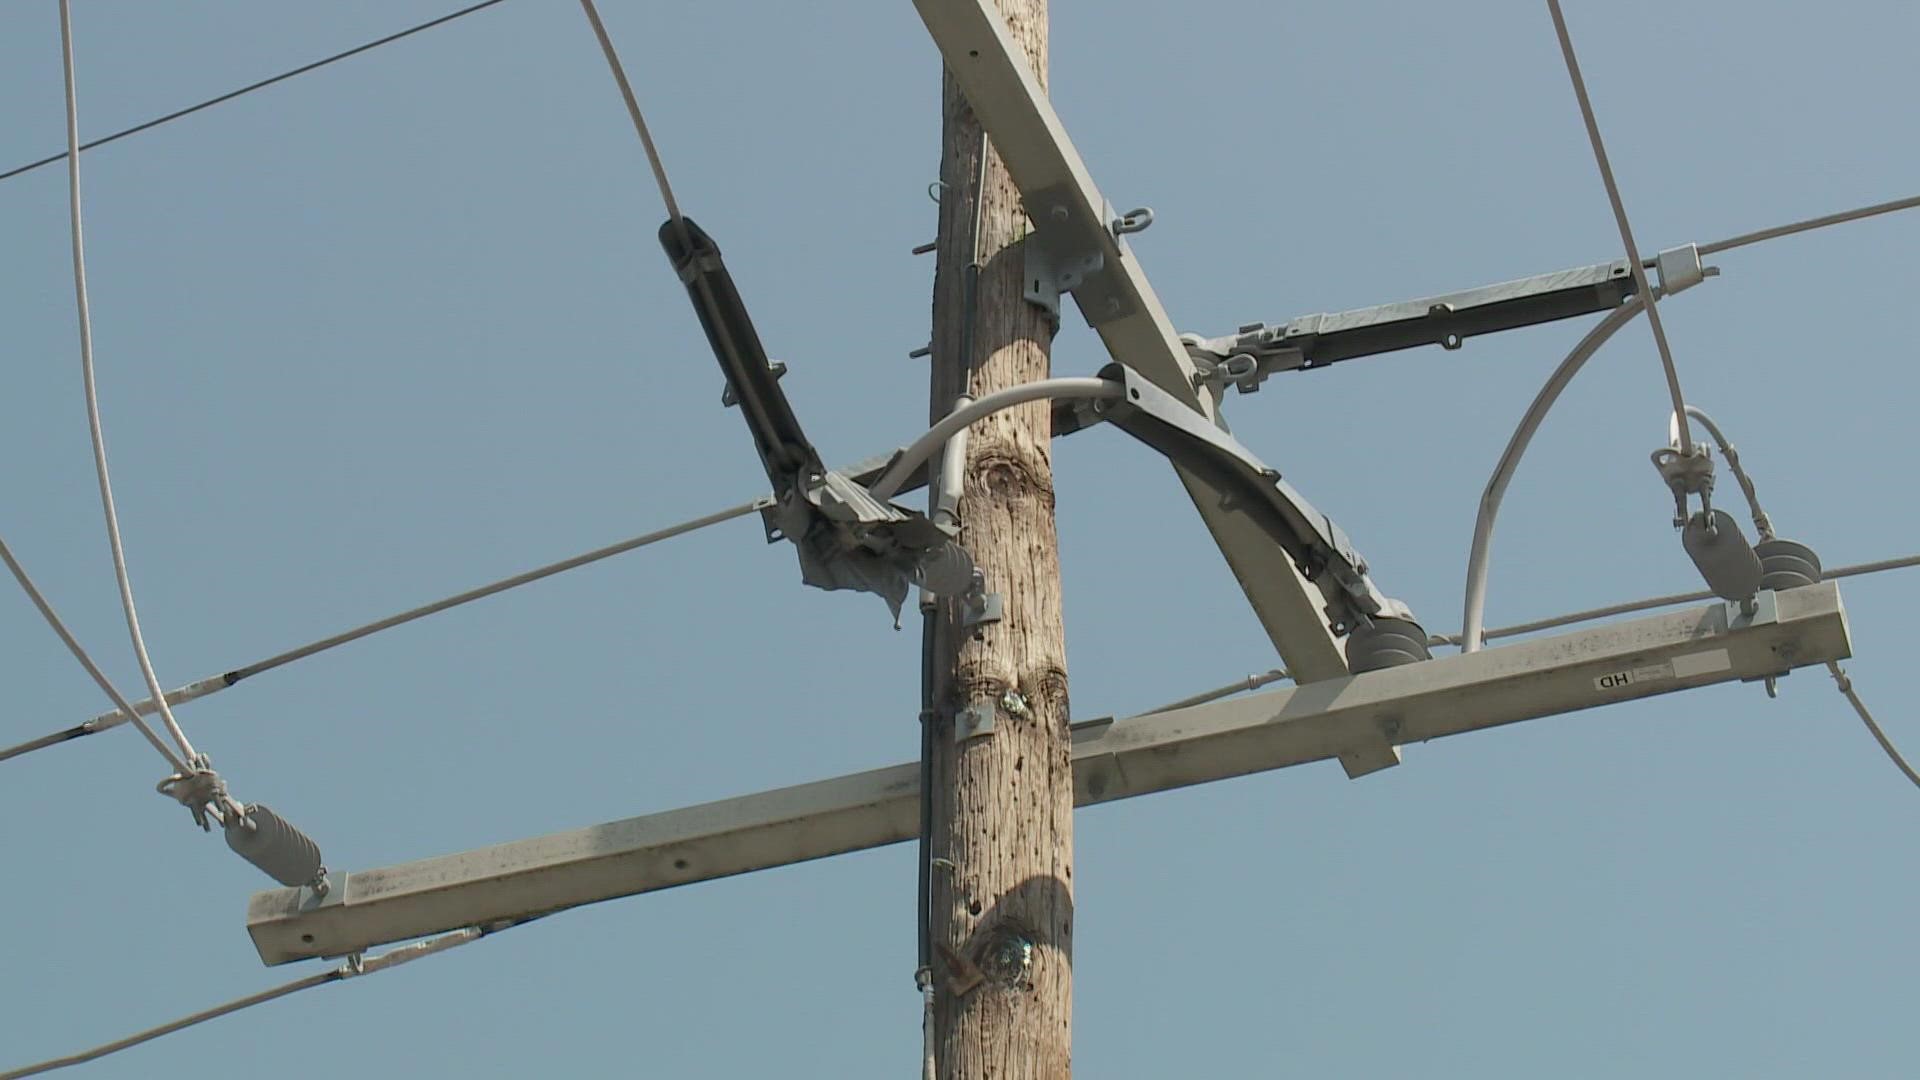 Some areas hit by Hurricane Ida won't get power until September 29, Entergy says. More downed lines from Ida than Katrina, Delta, and Zeta combined.